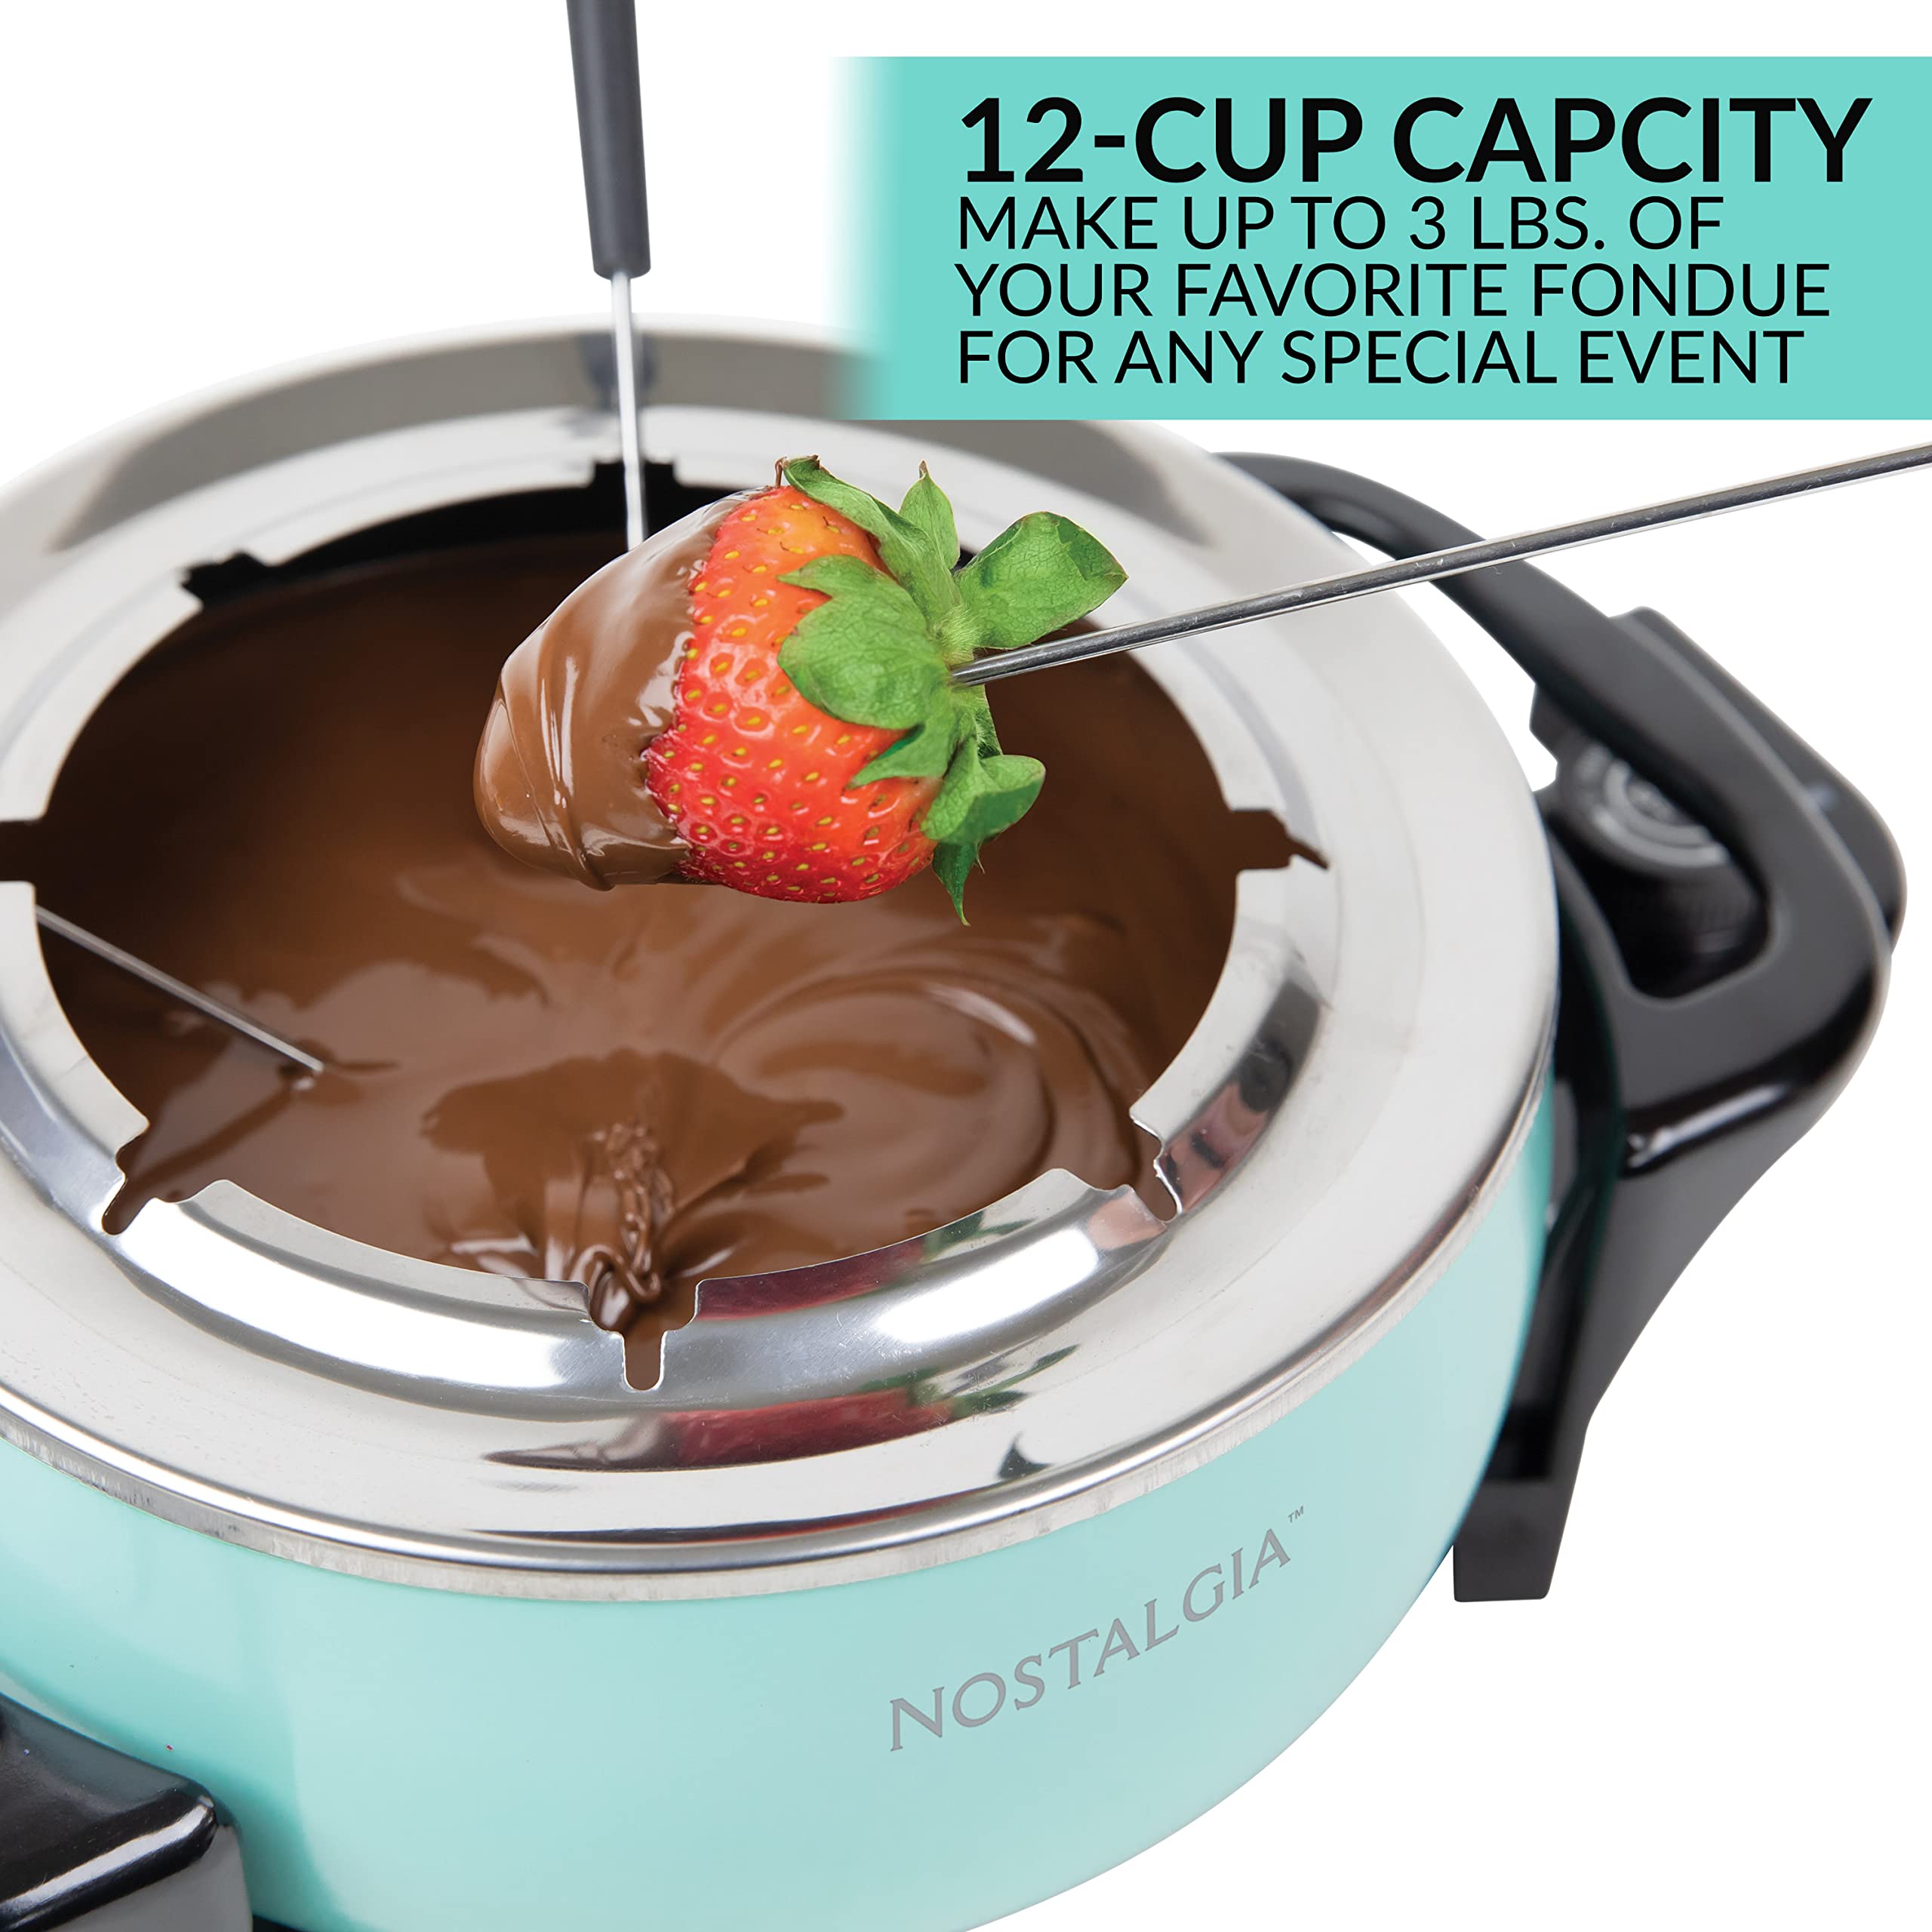 Nostalgia 12-Cup Electric Fondue Pot Set for Cheese & Chocolate - 8 Color-Coded Forks, Adjustable Temperature Control - Stylish Serving for Hors d'Oeuvres, Entrees, and Desserts - Aqua